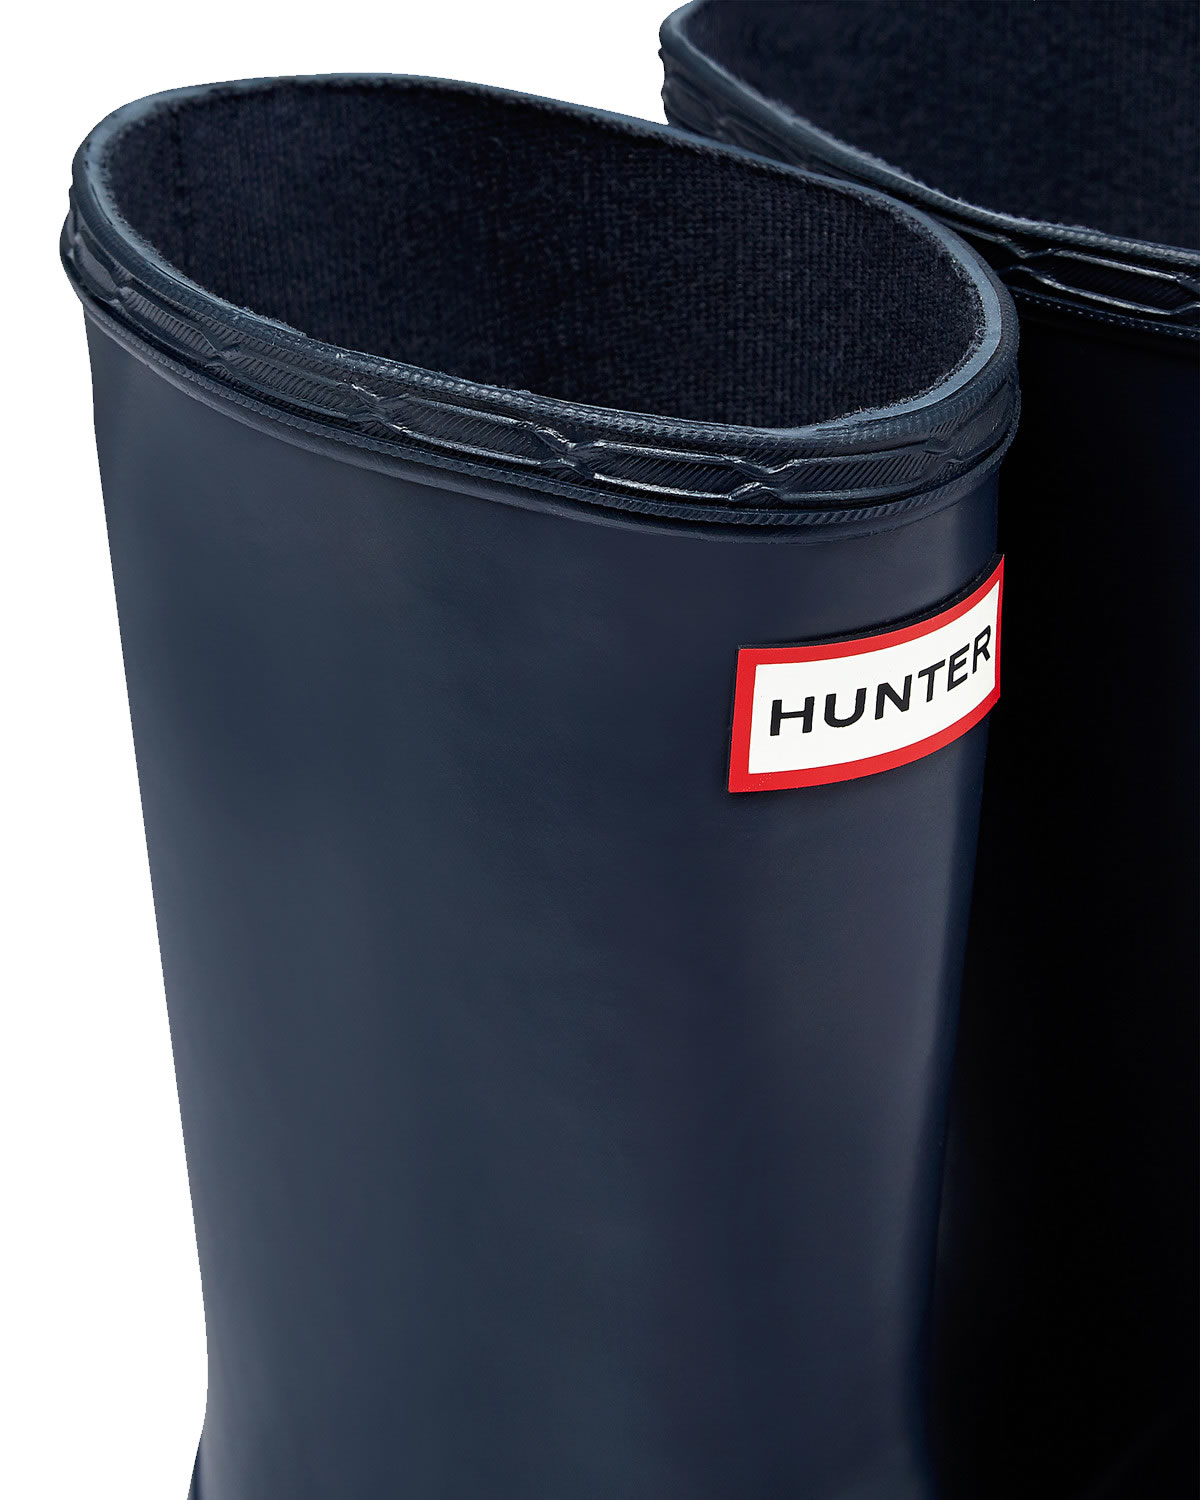 Extra image of Kids First Hunter Wellies - Navy UK 7 INF (EURO 24)